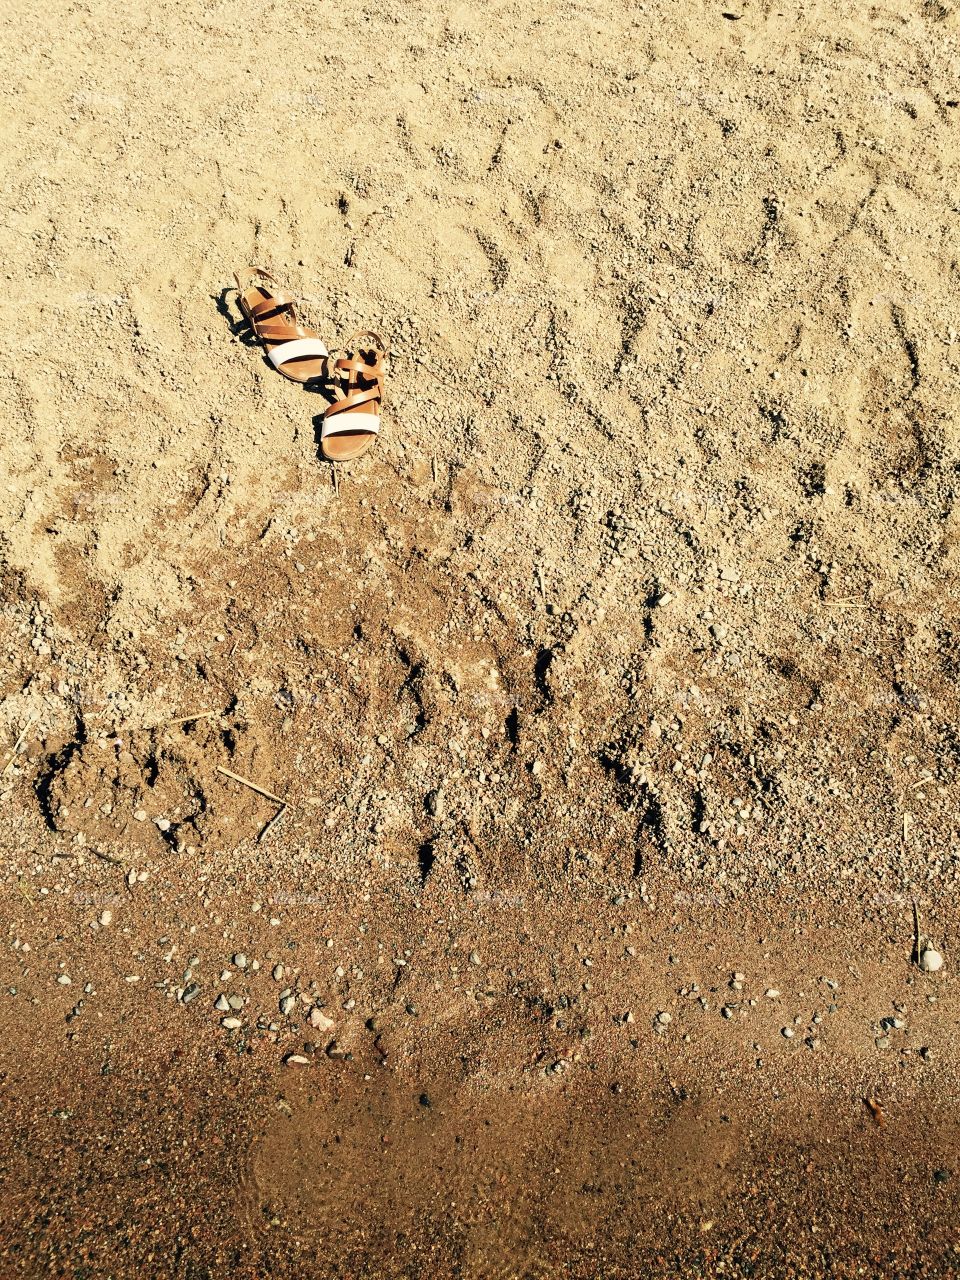 Summer moved on. A pair of women sandals on sand of a beach